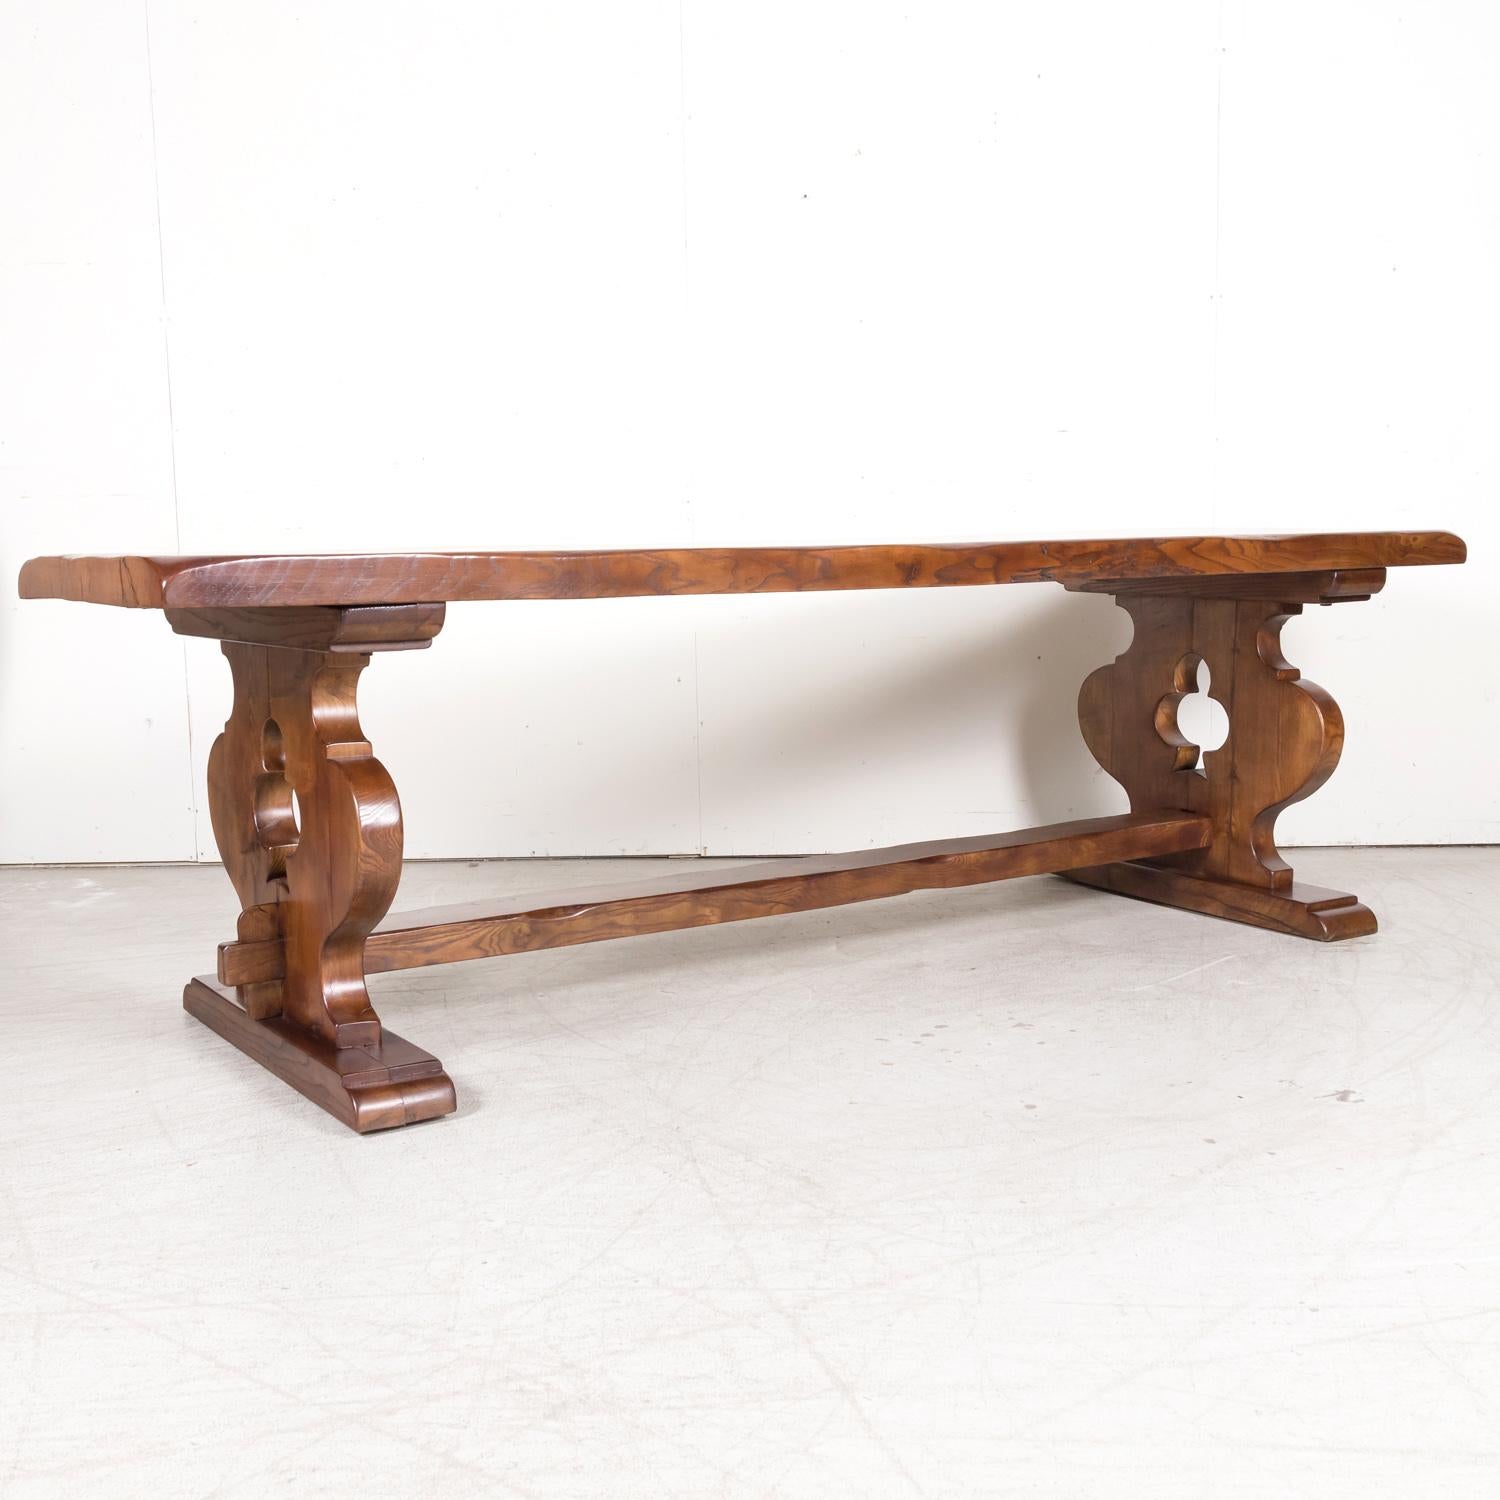 A 19th century French provincial trestle table handcrafted of solid chestnut by talented artisans in the Normandy region of France, circa 1890s. This beautiful French dining table has a rectangular plank top supported by carved trestle bases that